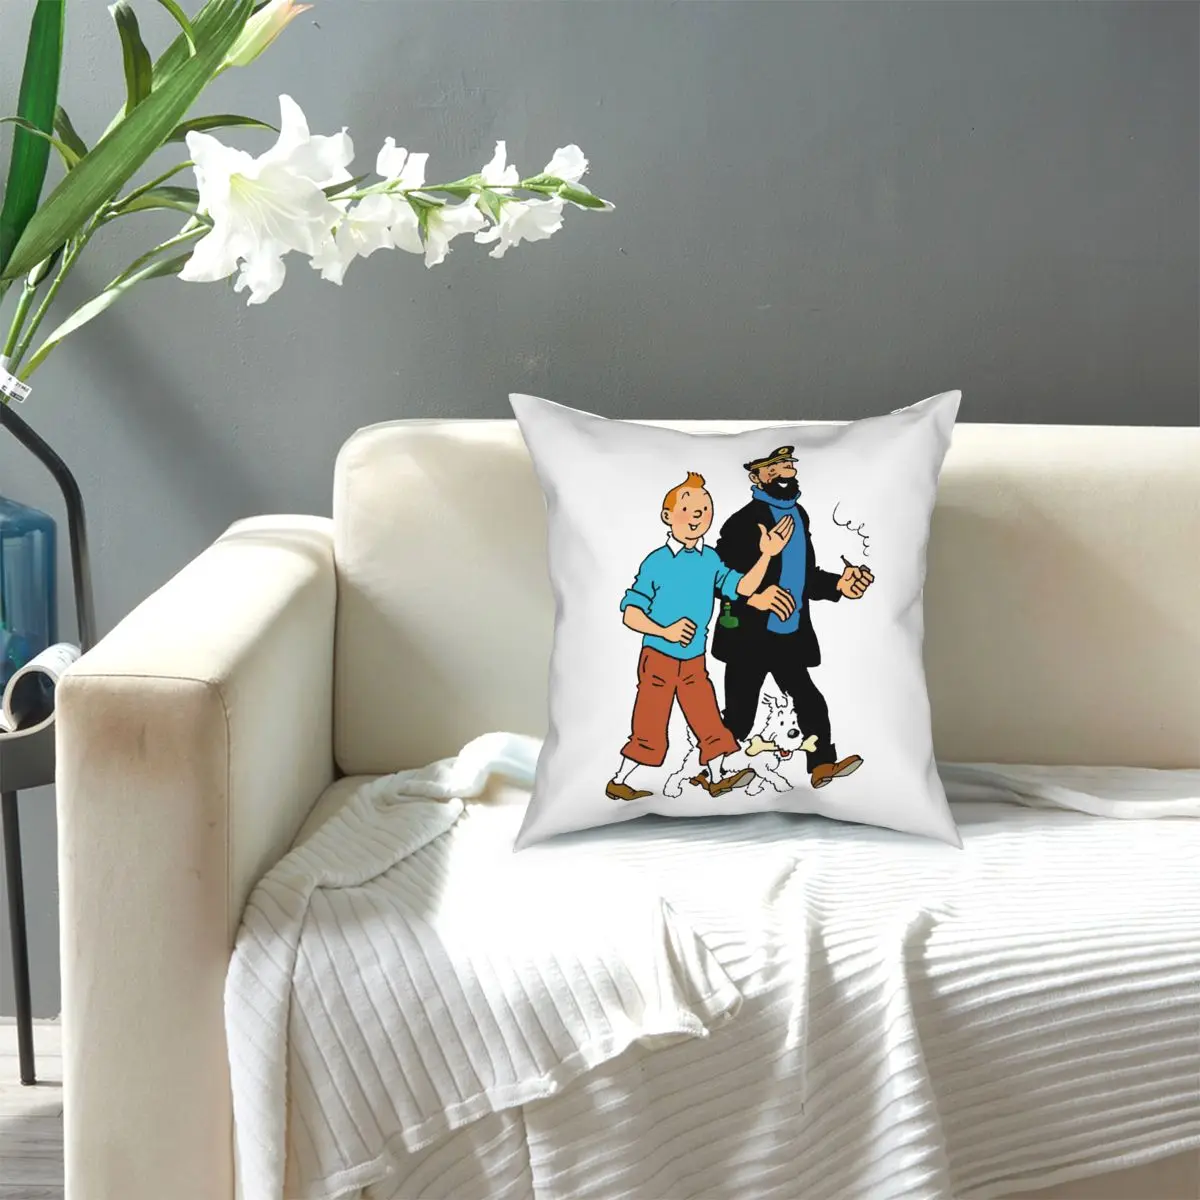 

Tintin And Captain Haddock Pillowcase Decoration The Adventures of Tintin Cushions Throw Pillow for Sofa Double-sided Printing